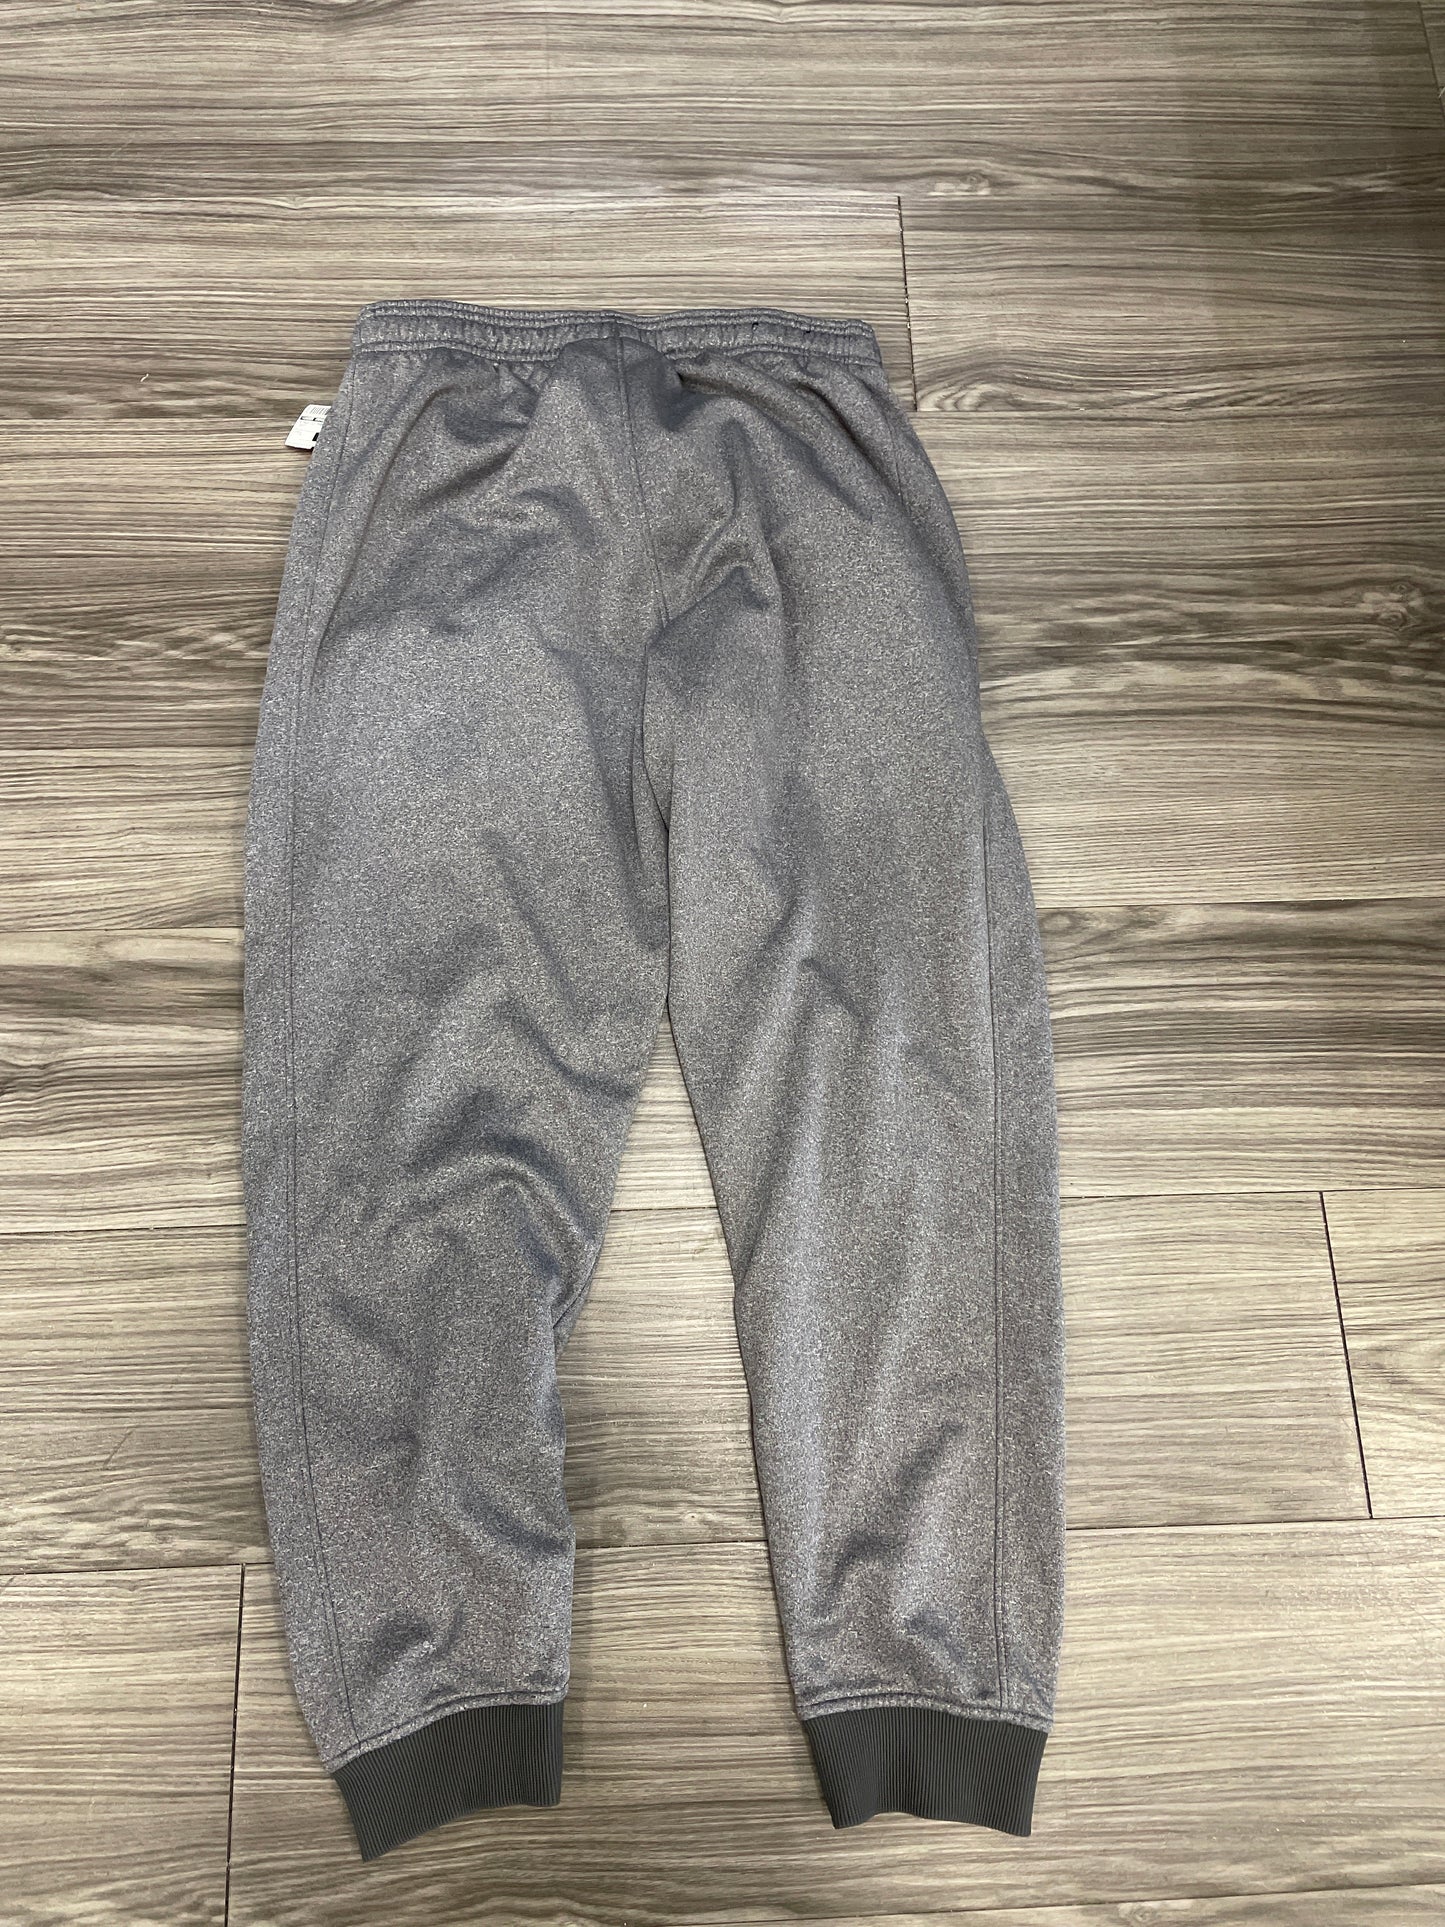 Athletic Pants By Under Armour  Size: L